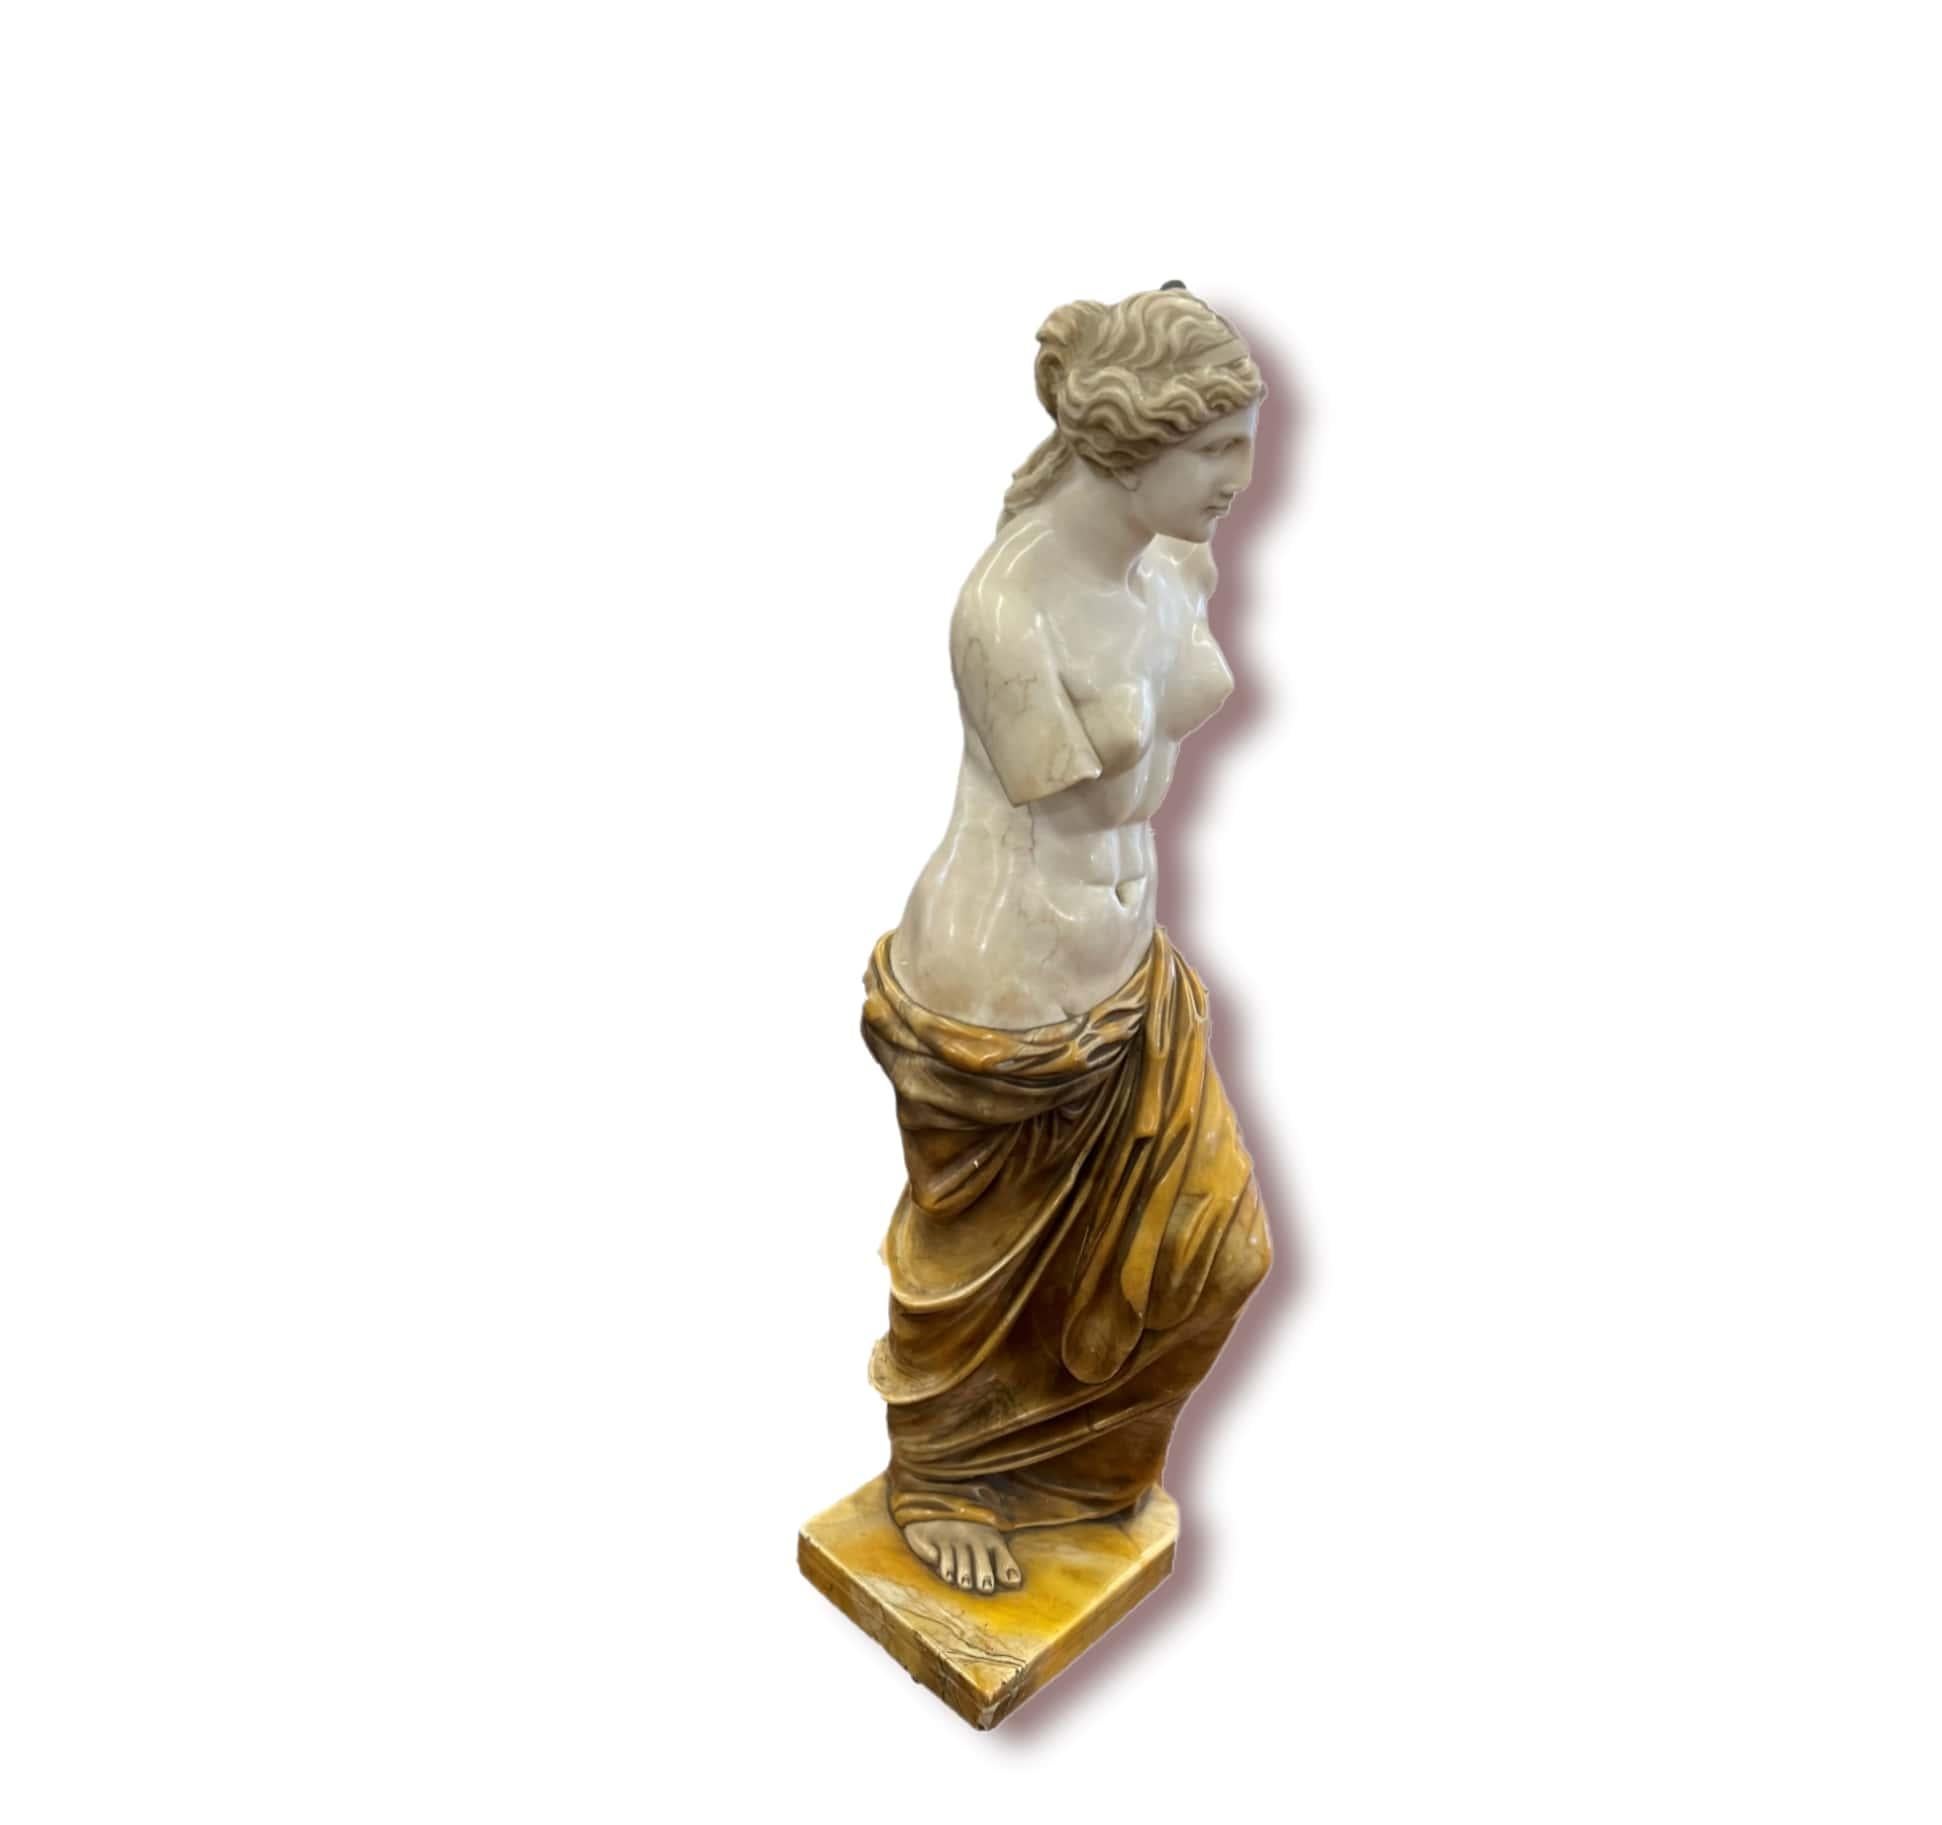 Precious neoclassical marble sculpture. Made of white statuary marble and ancient yellow marble. Finely carved in every detail. Important representation of the well-known Aphrodite of Milo, better known as Venus de Milo.

Italian origin,